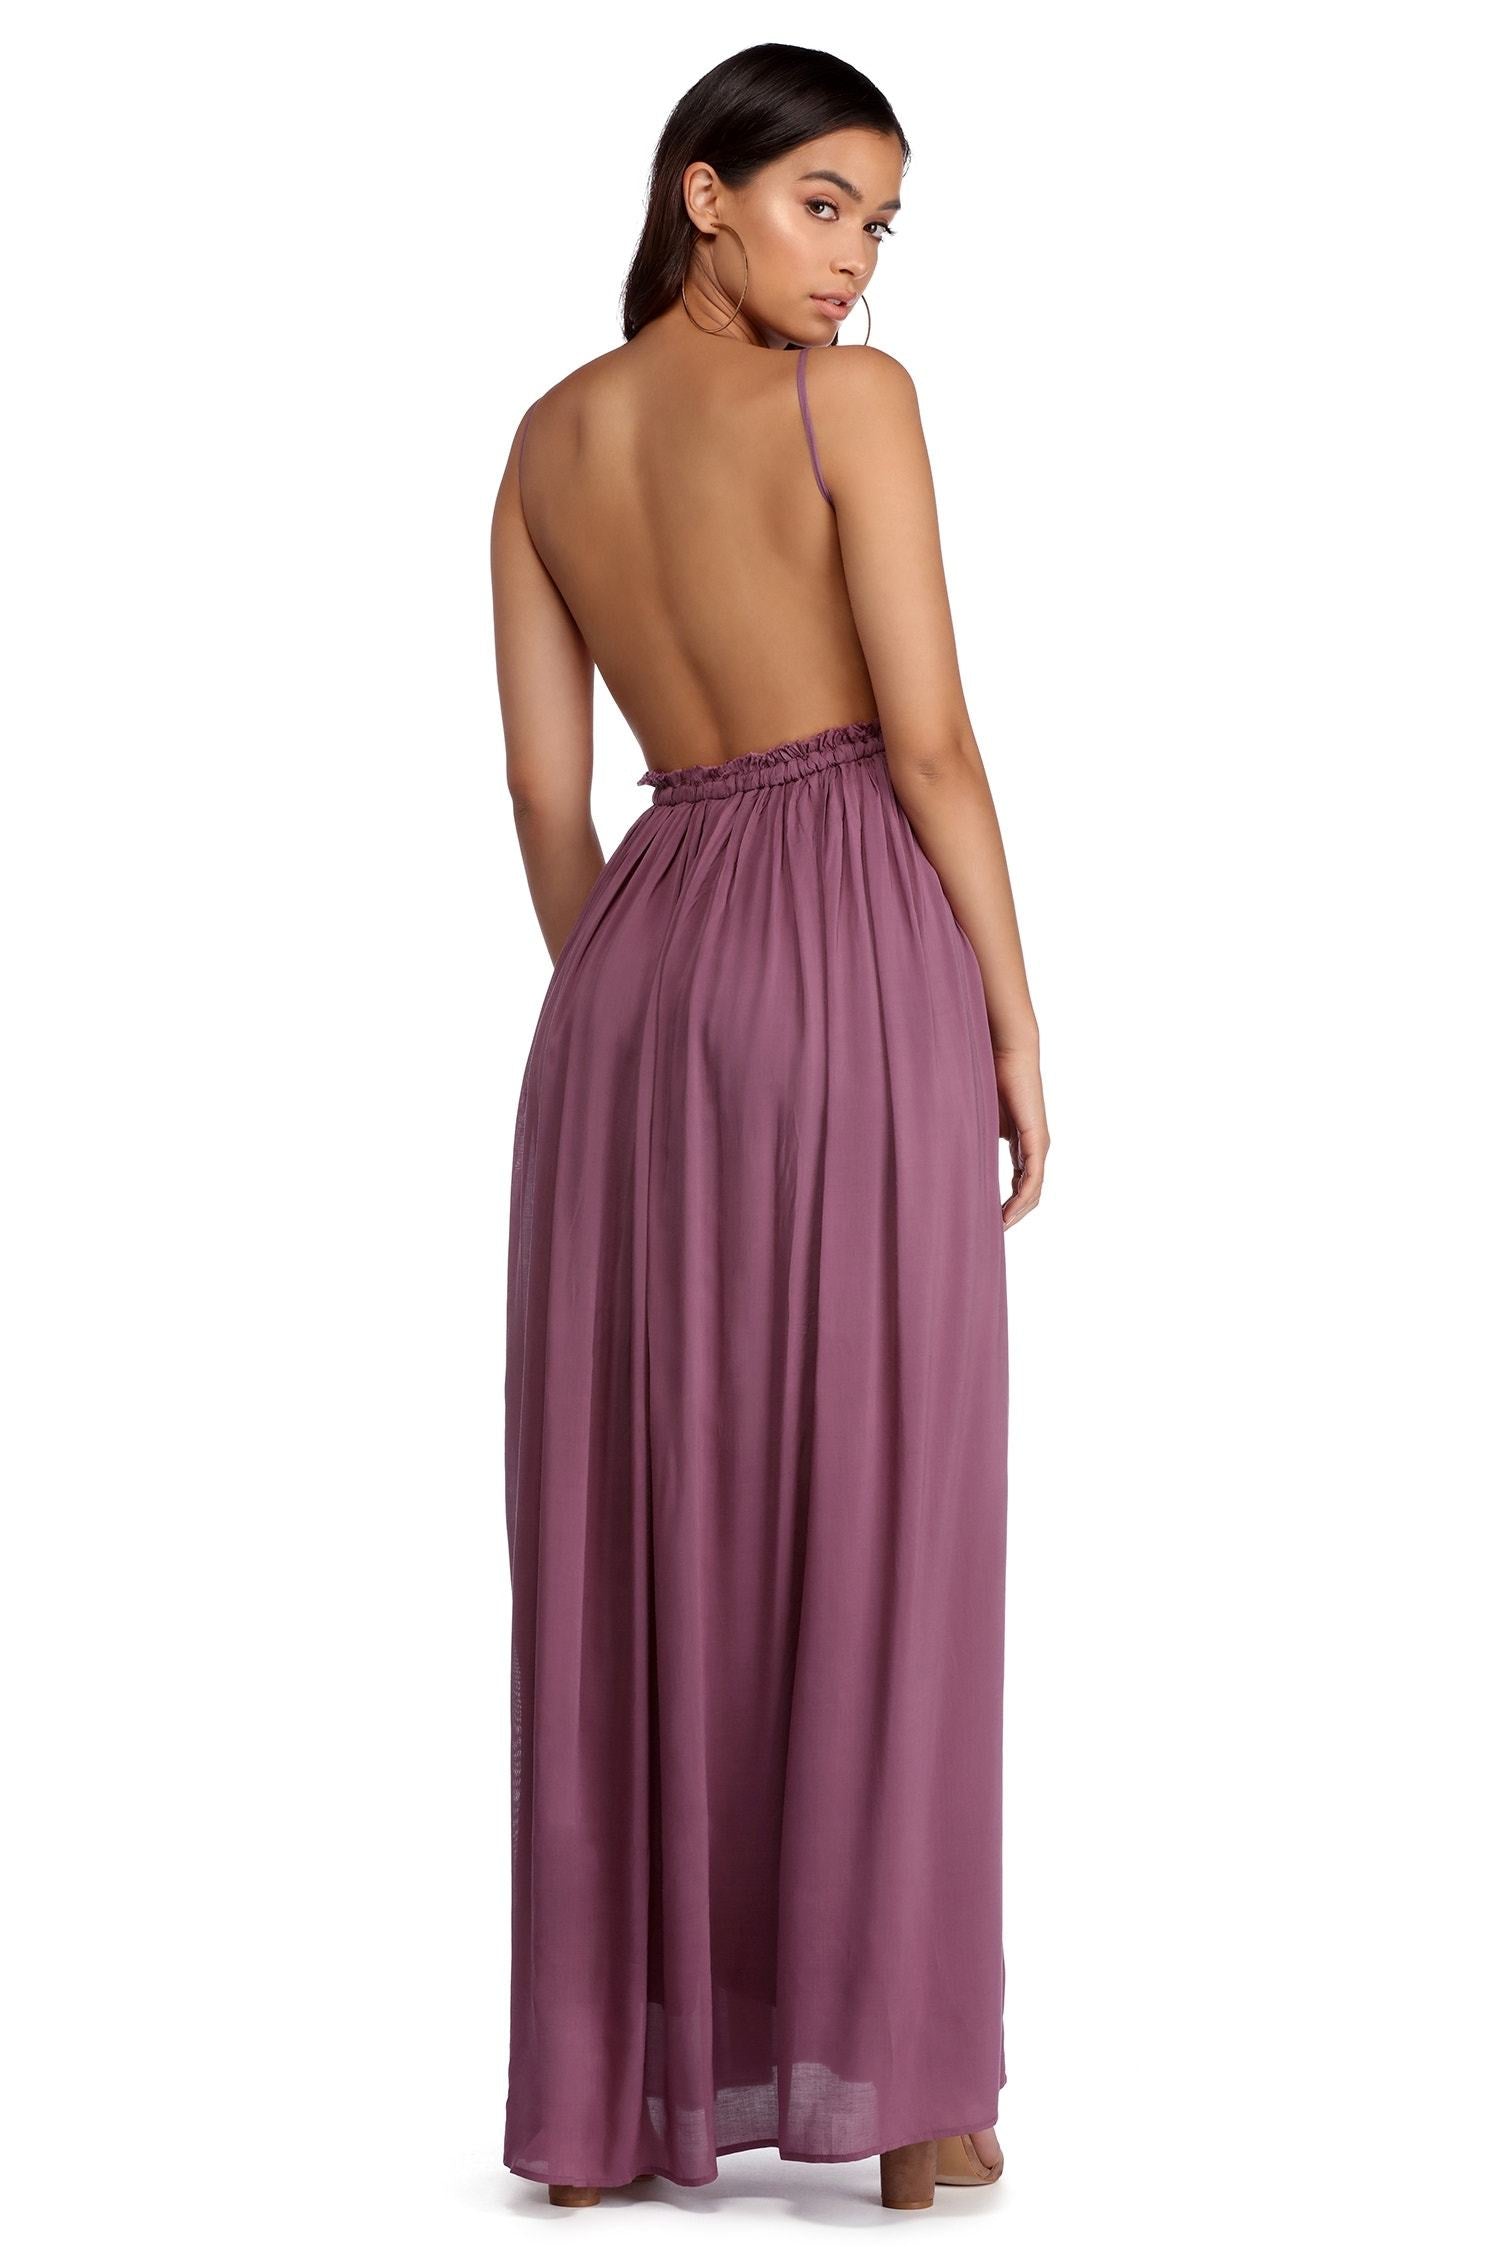 Ethereal Beauty Maxi Dress - Lady Occasions